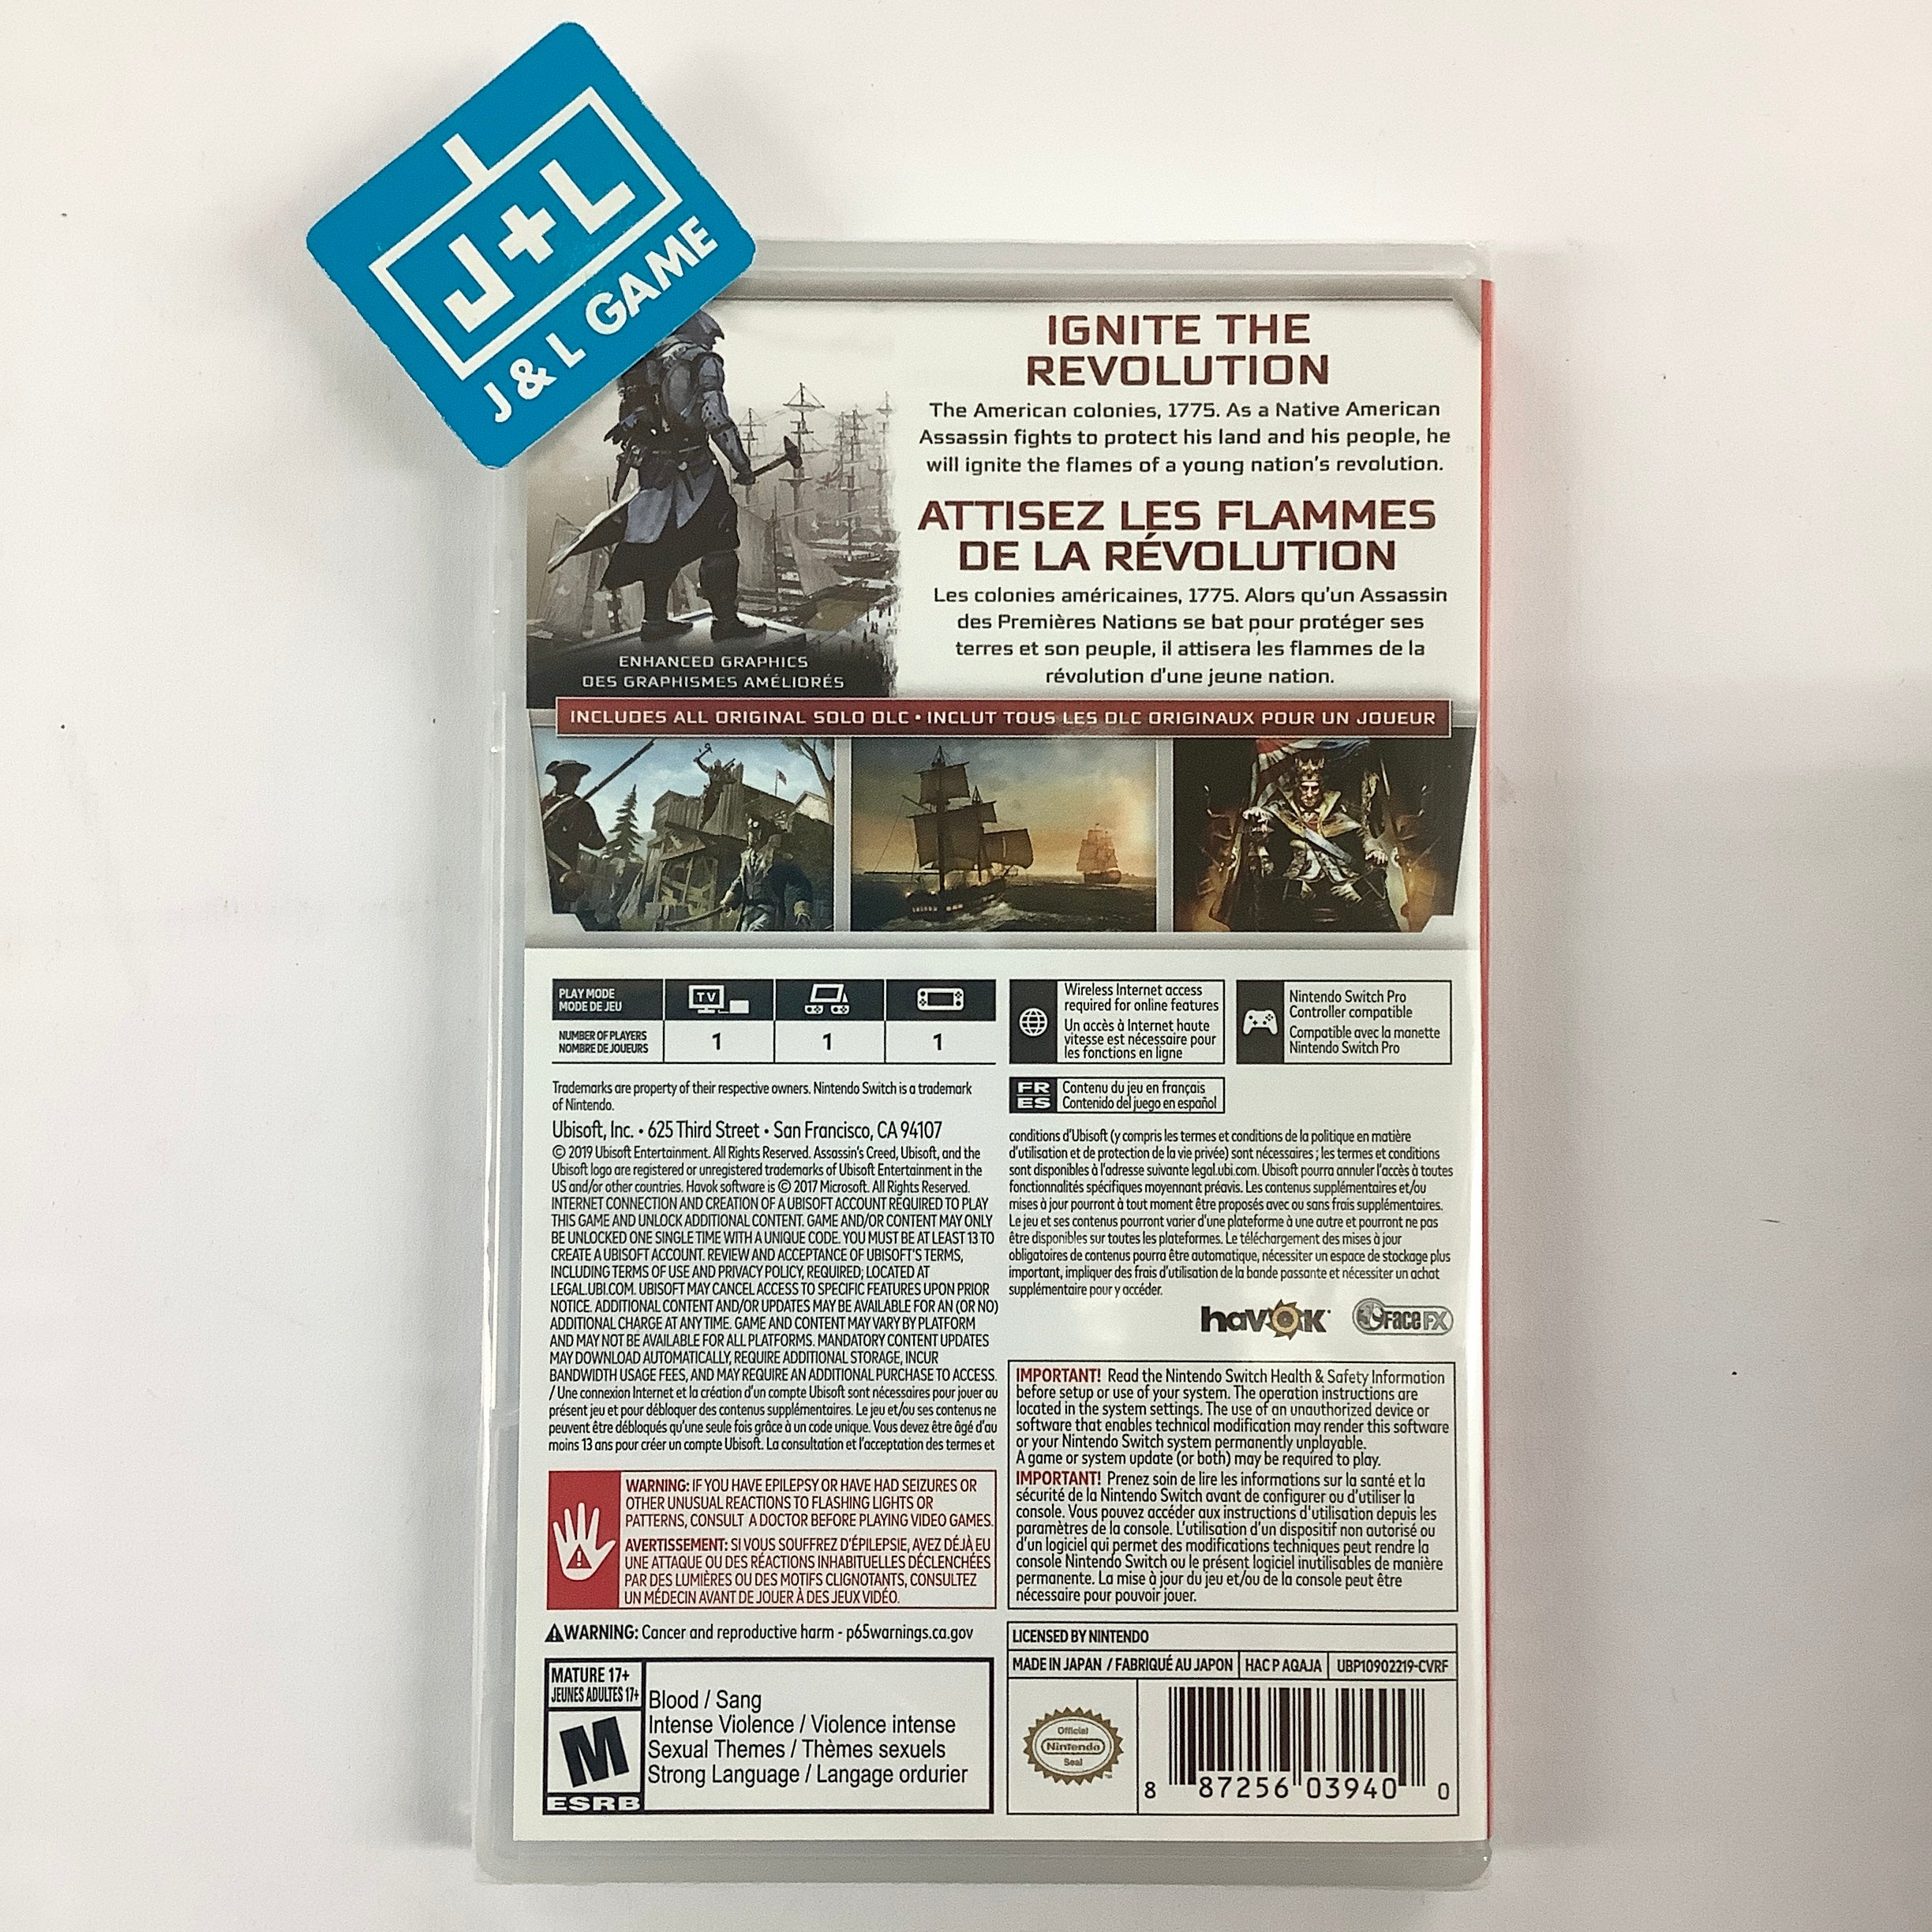 Assassin's Creed III: Remastered - (NSW) Nintendo Switch Video Games Ubisoft   